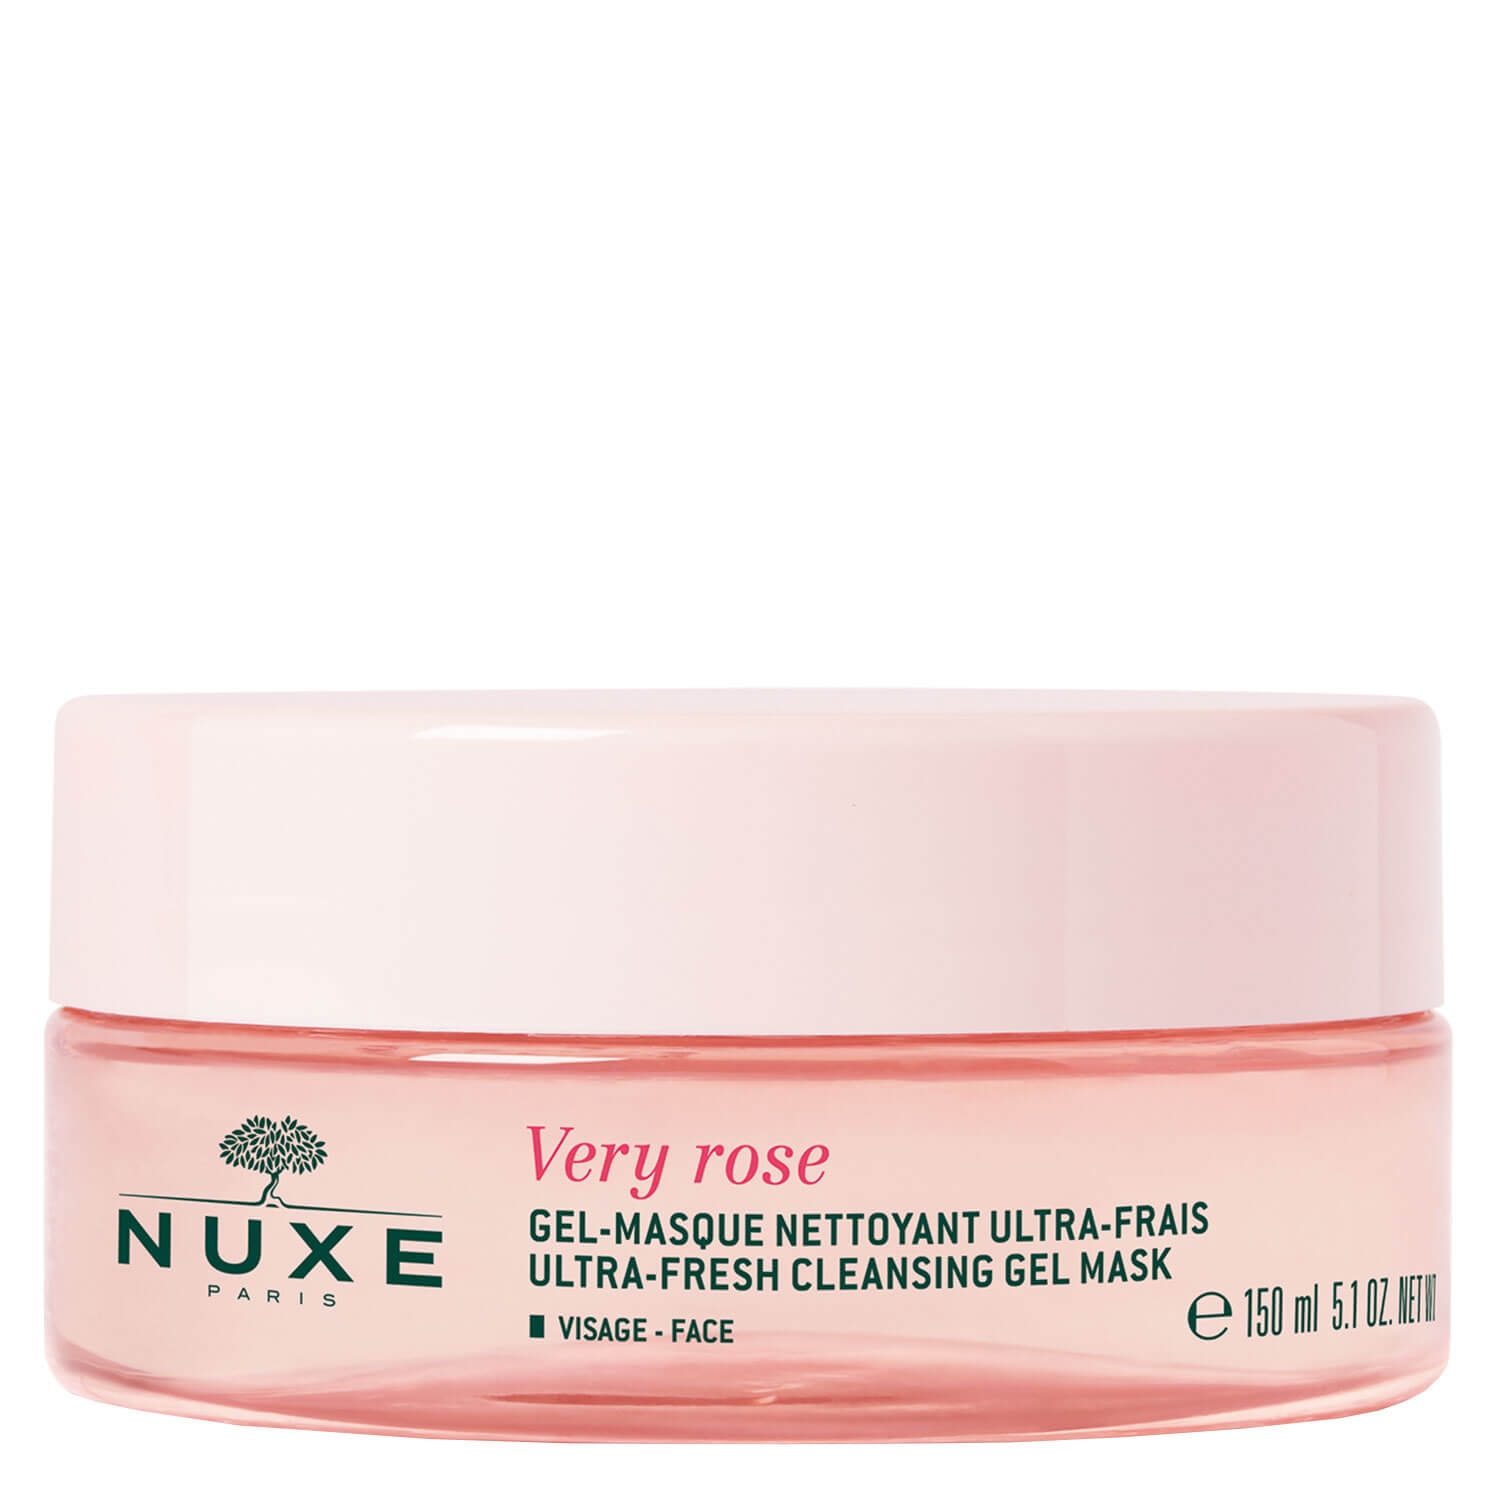 Product image from Very Rose - Gel-Masque Nettoyant Ultra-Frais